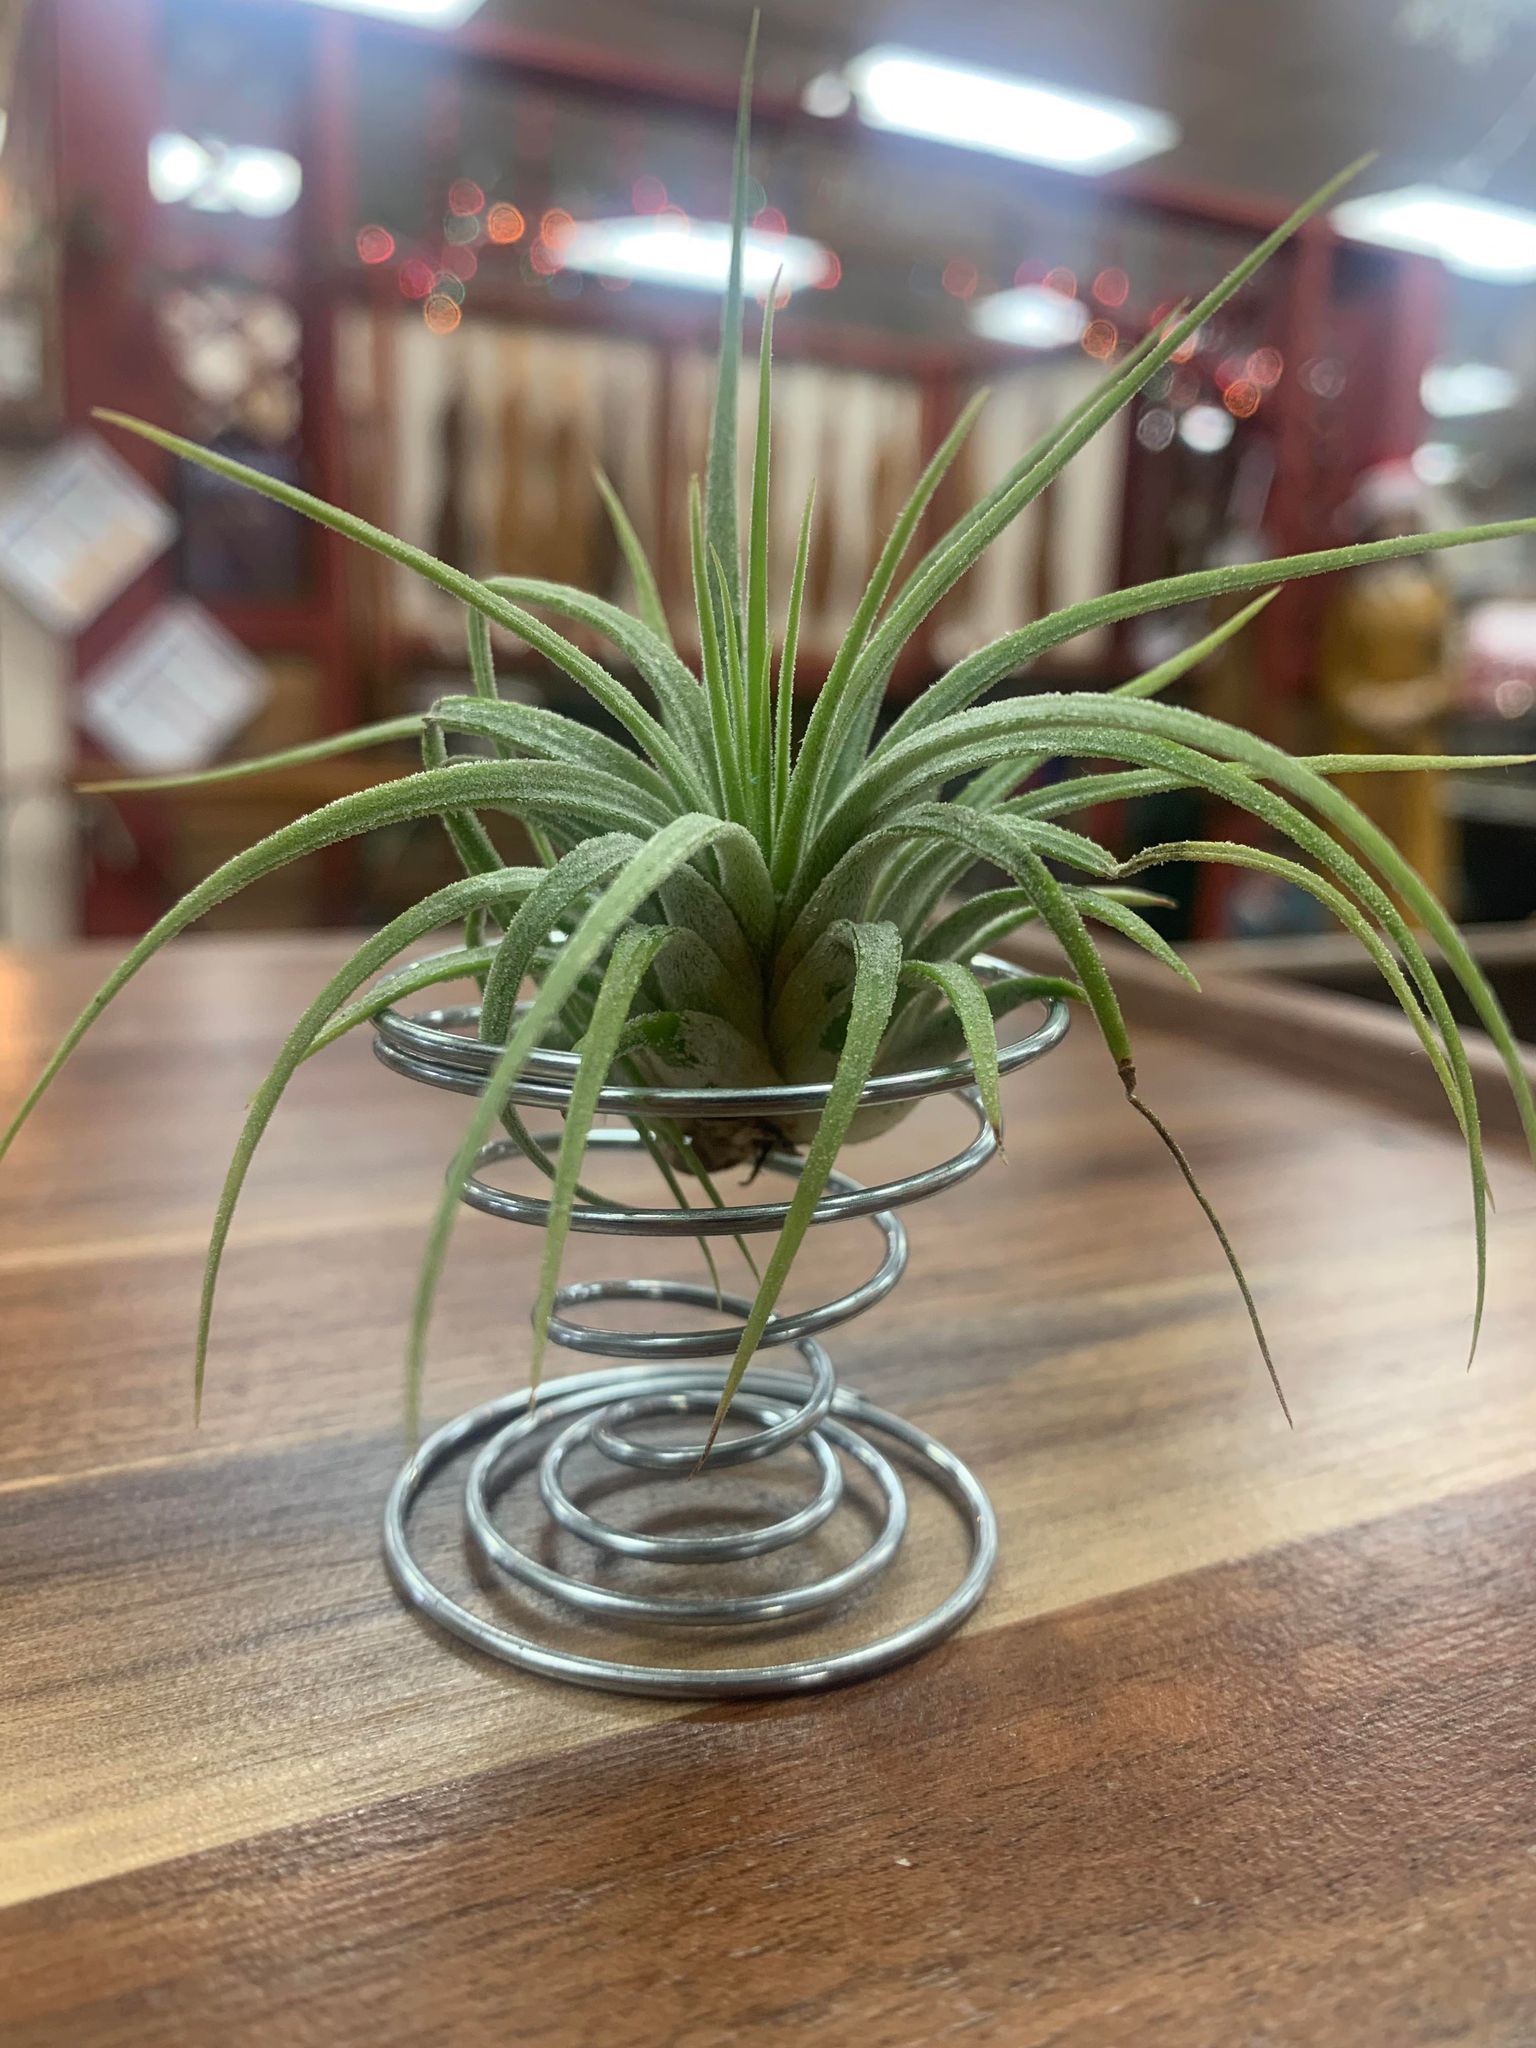 A small air plant displayed on a table with an Air Plant Wire Coil Stand.